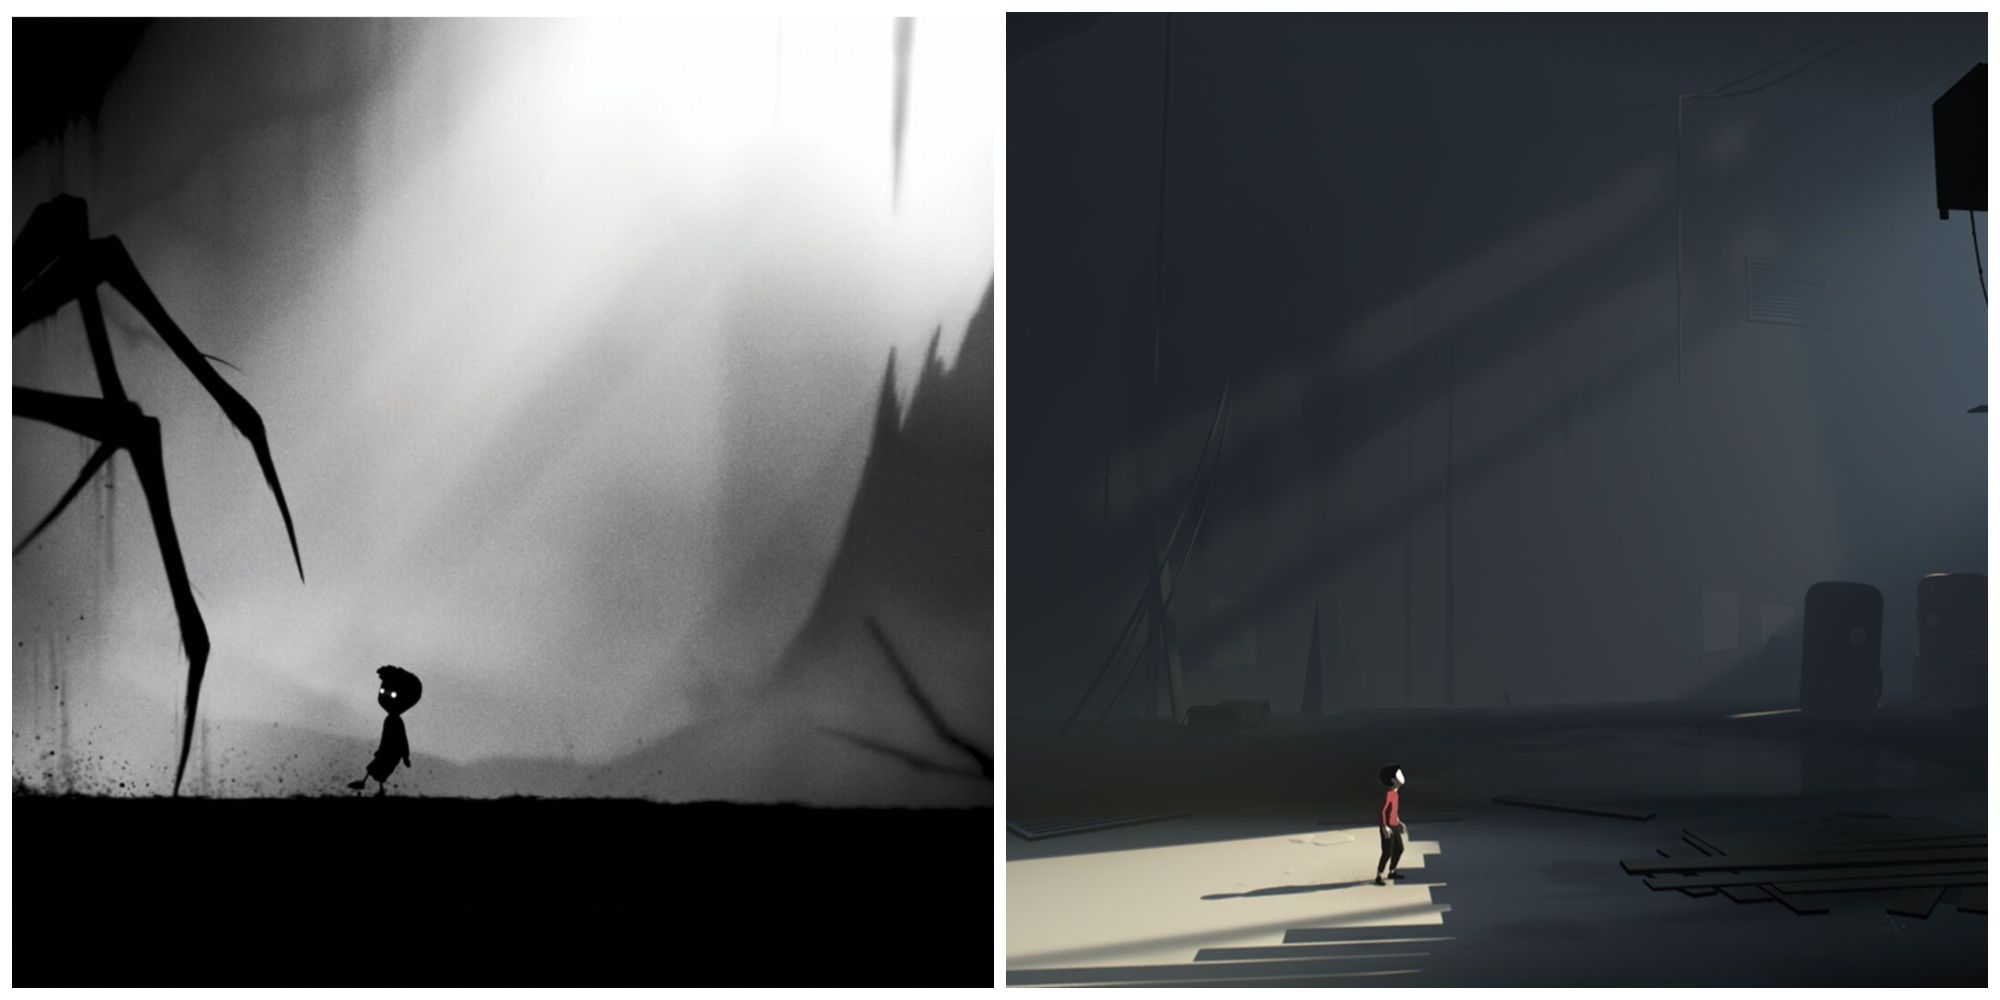 In-game images from Limbo and Inside